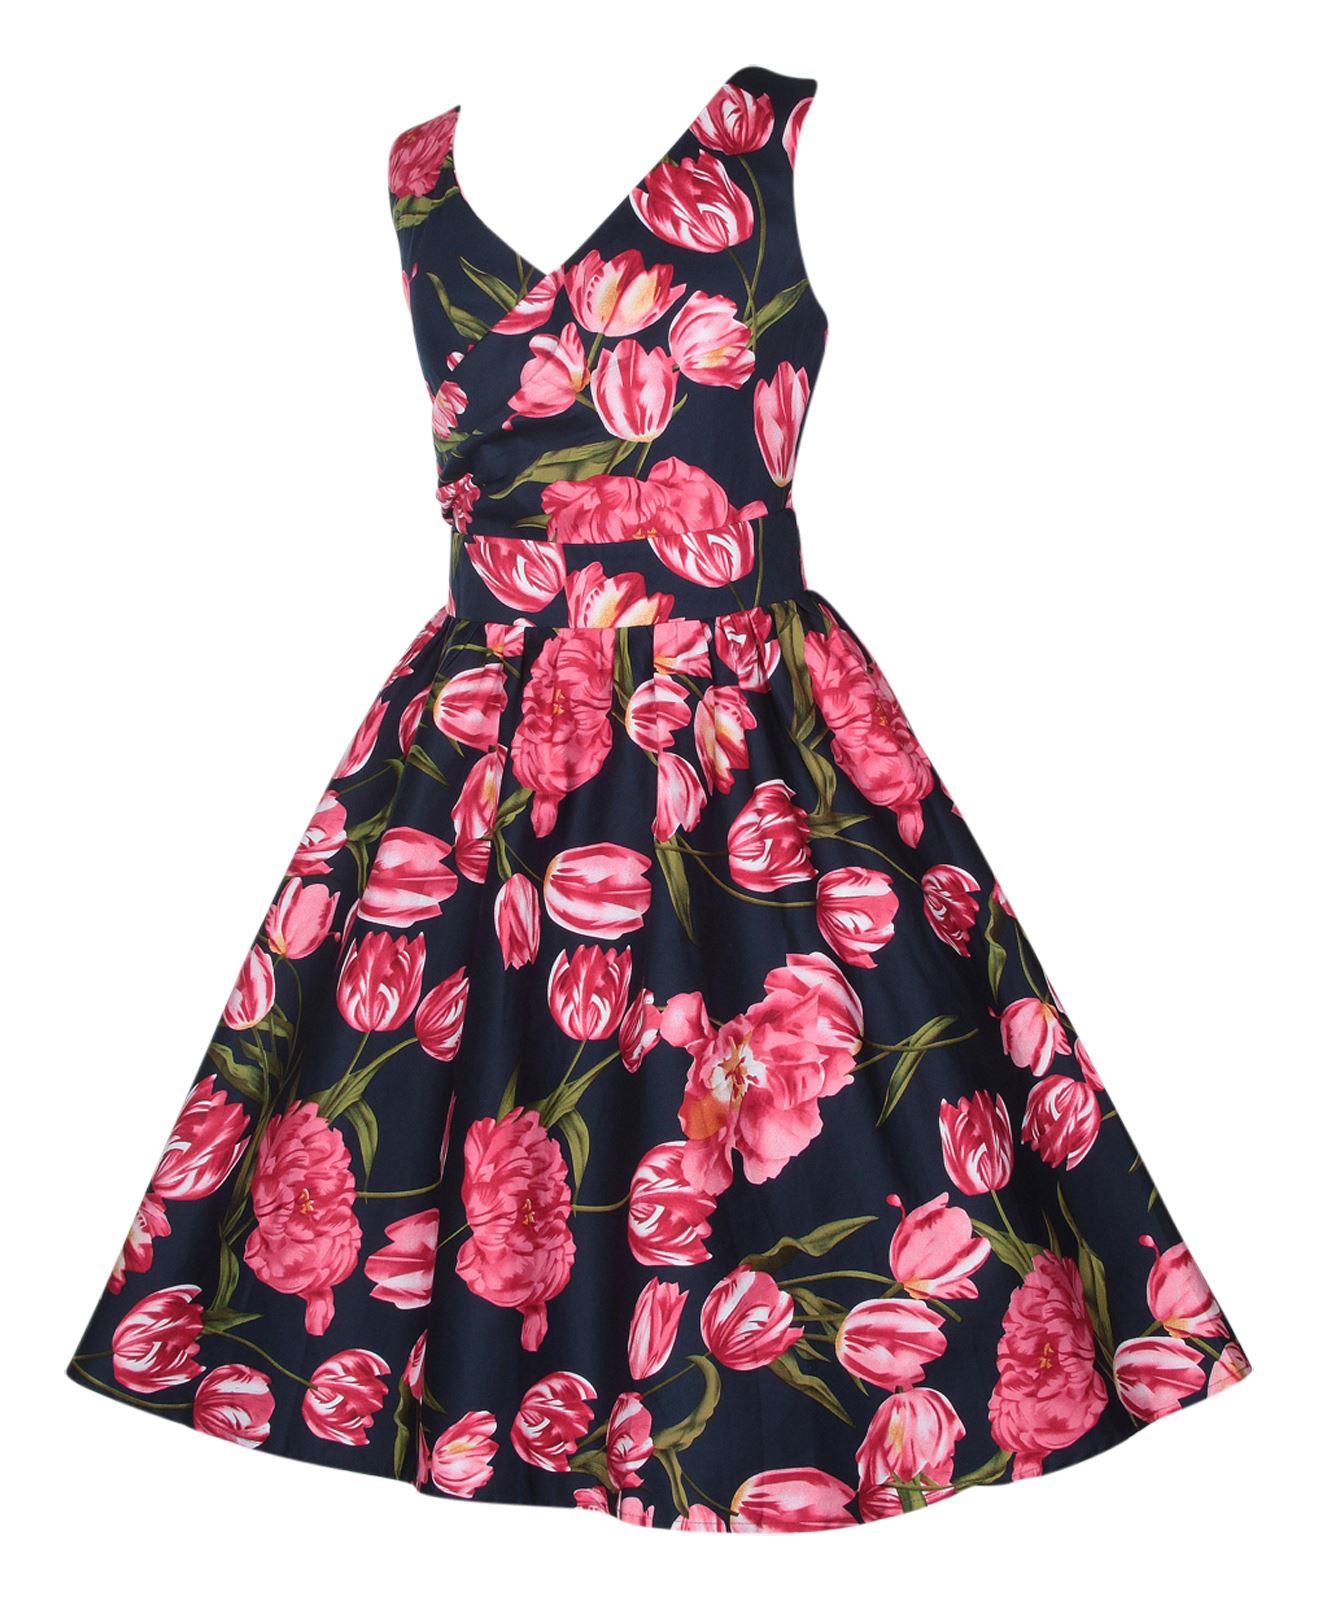 May V neck floral dress, in navy blue, with pink tulips, side view